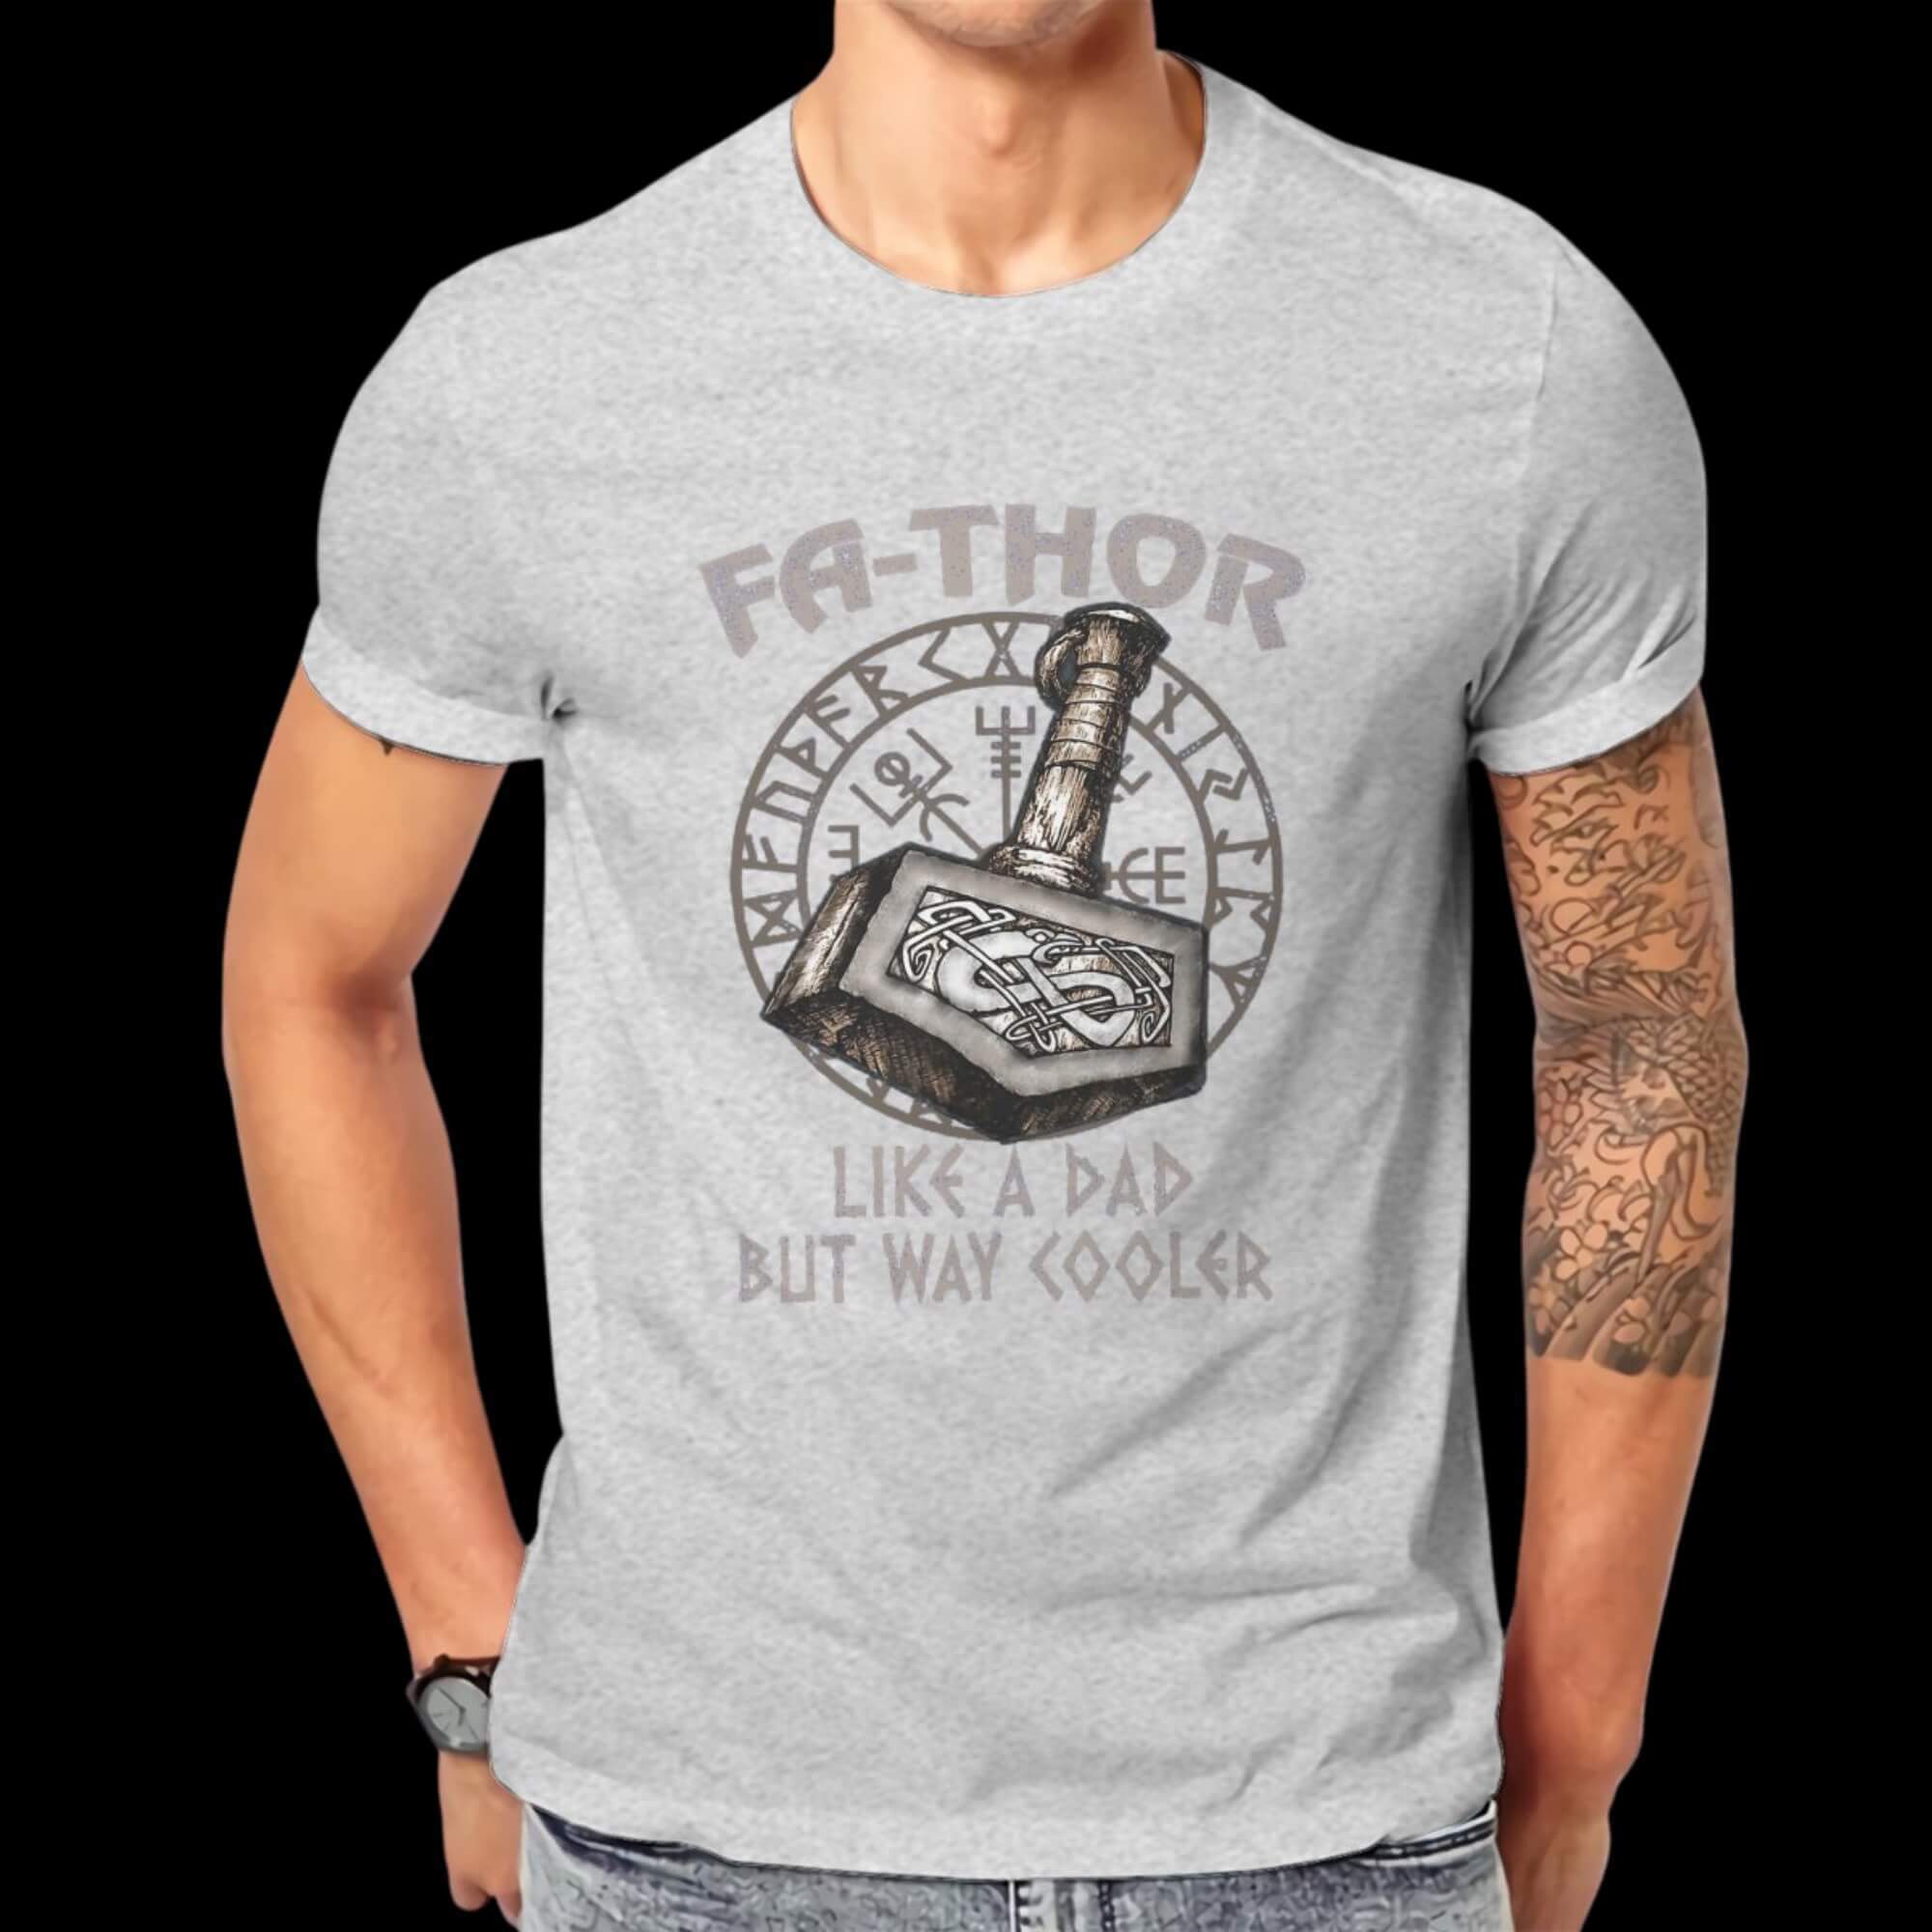 Father Thor T-shirt